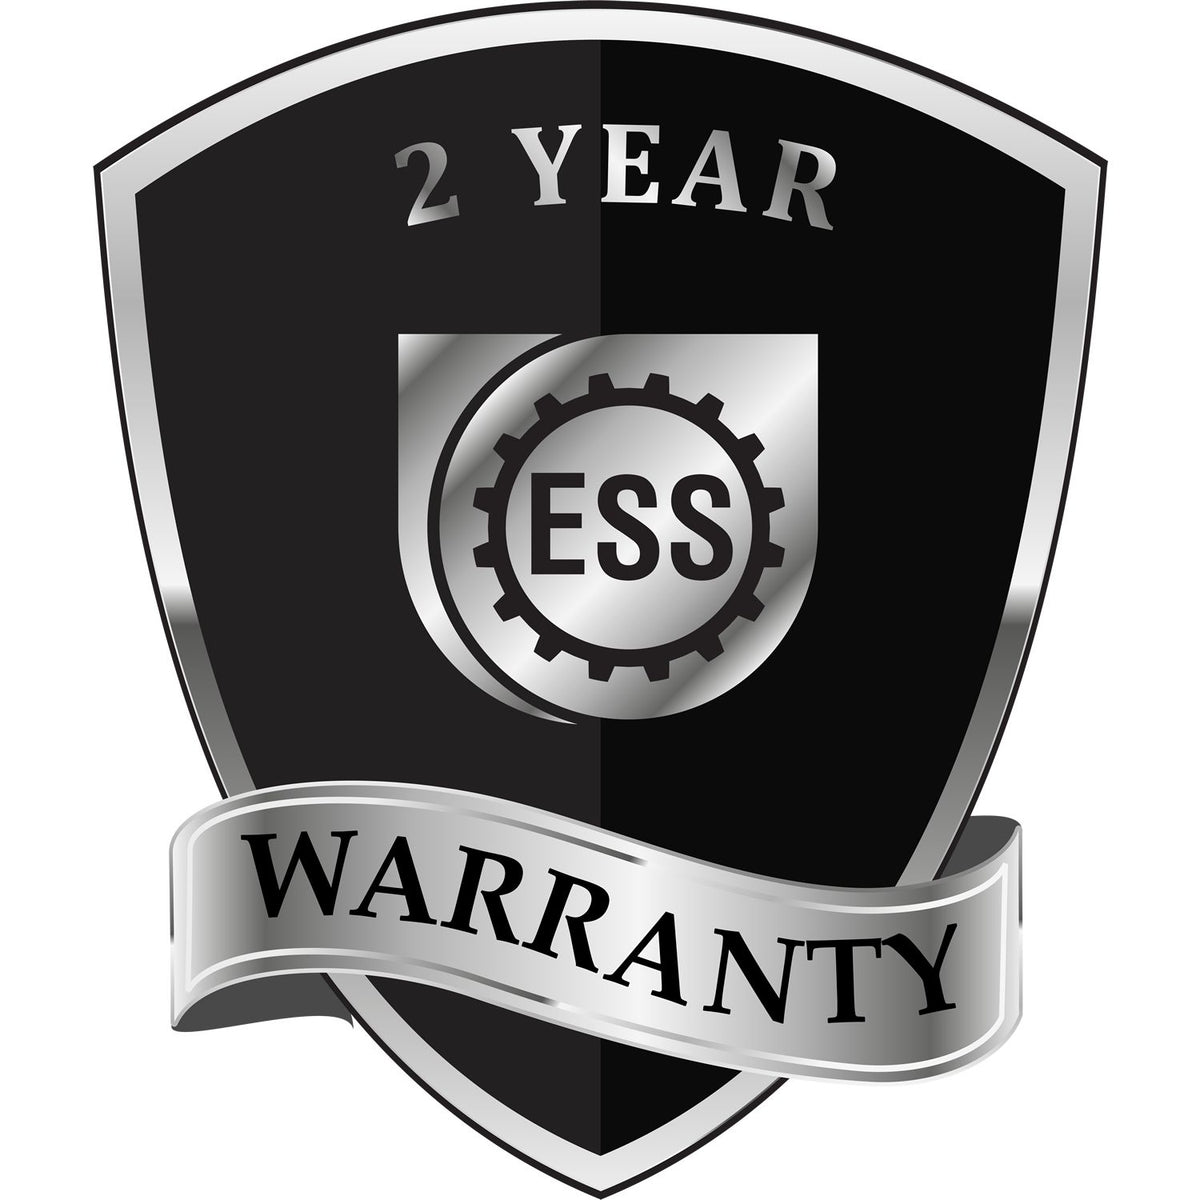 A black and silver badge or emblem showing warranty information for the Gift Tennessee Architect Seal